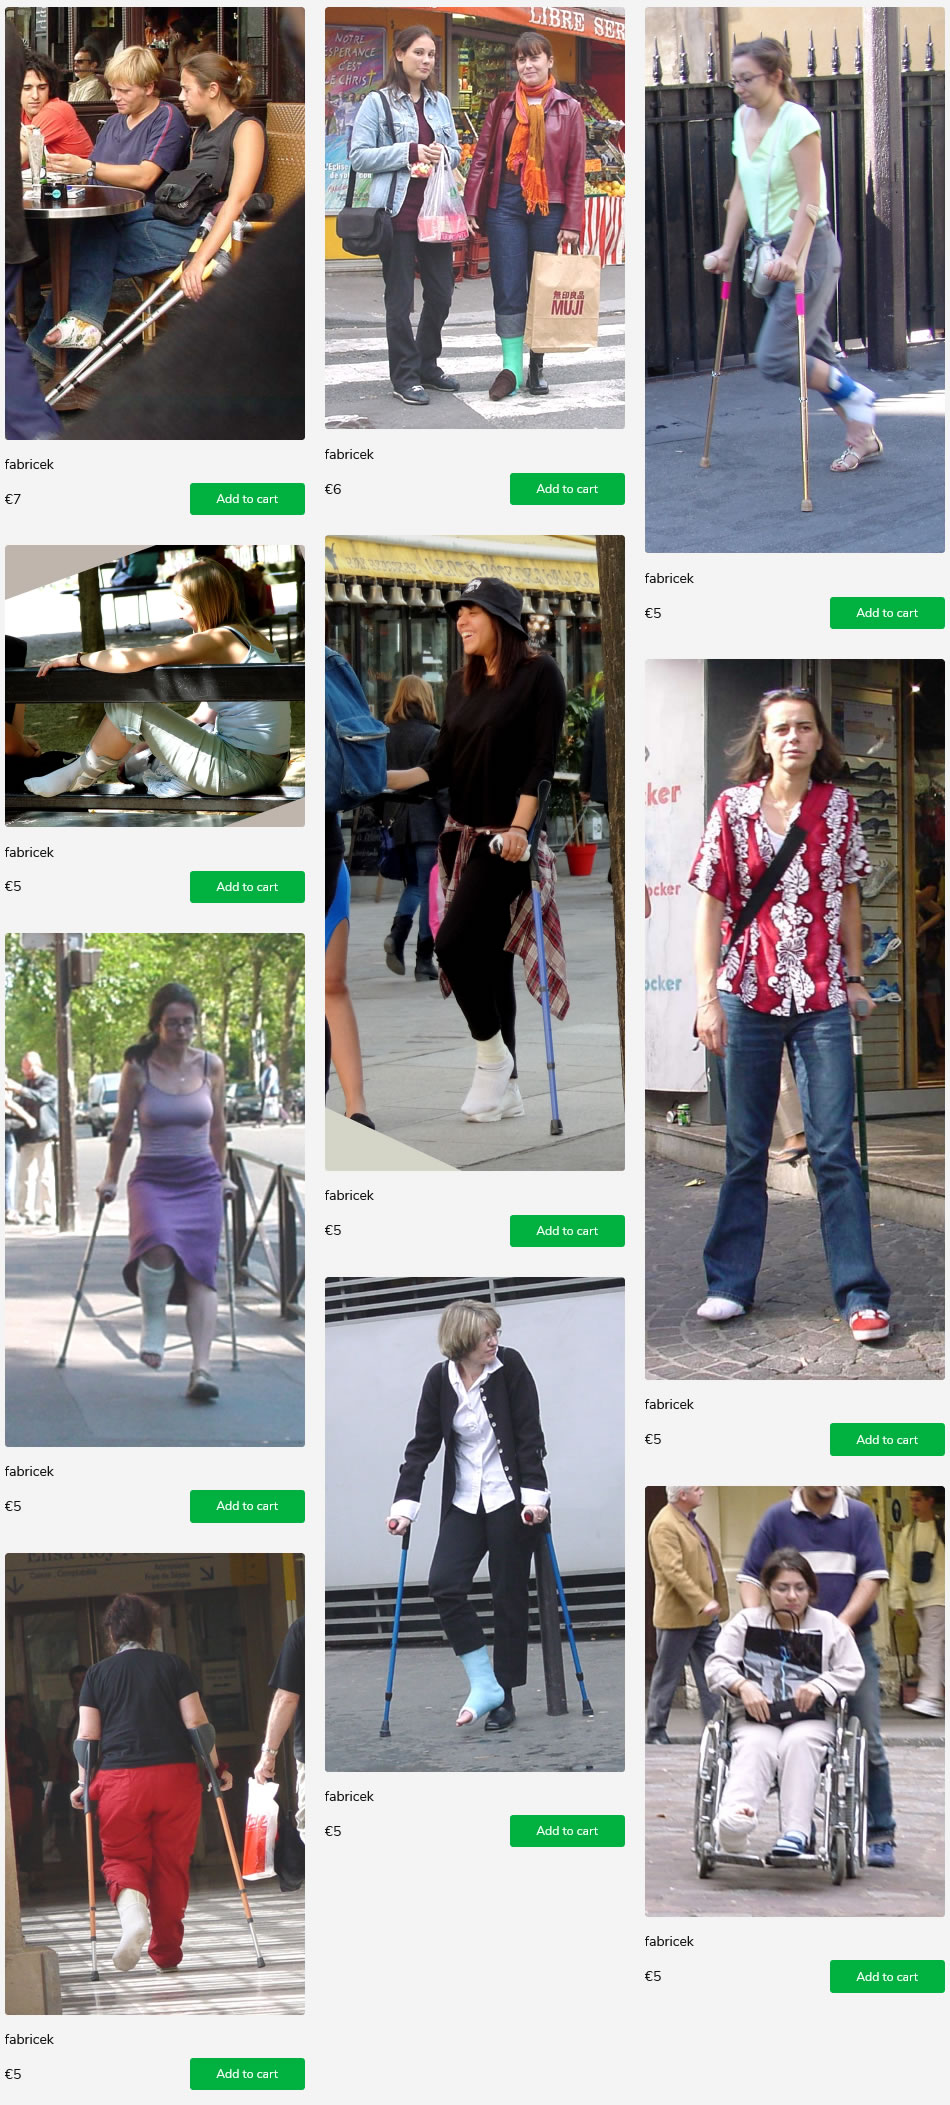 10 sets of women with casted or braced feet - some on crutches, one in wheelchair.